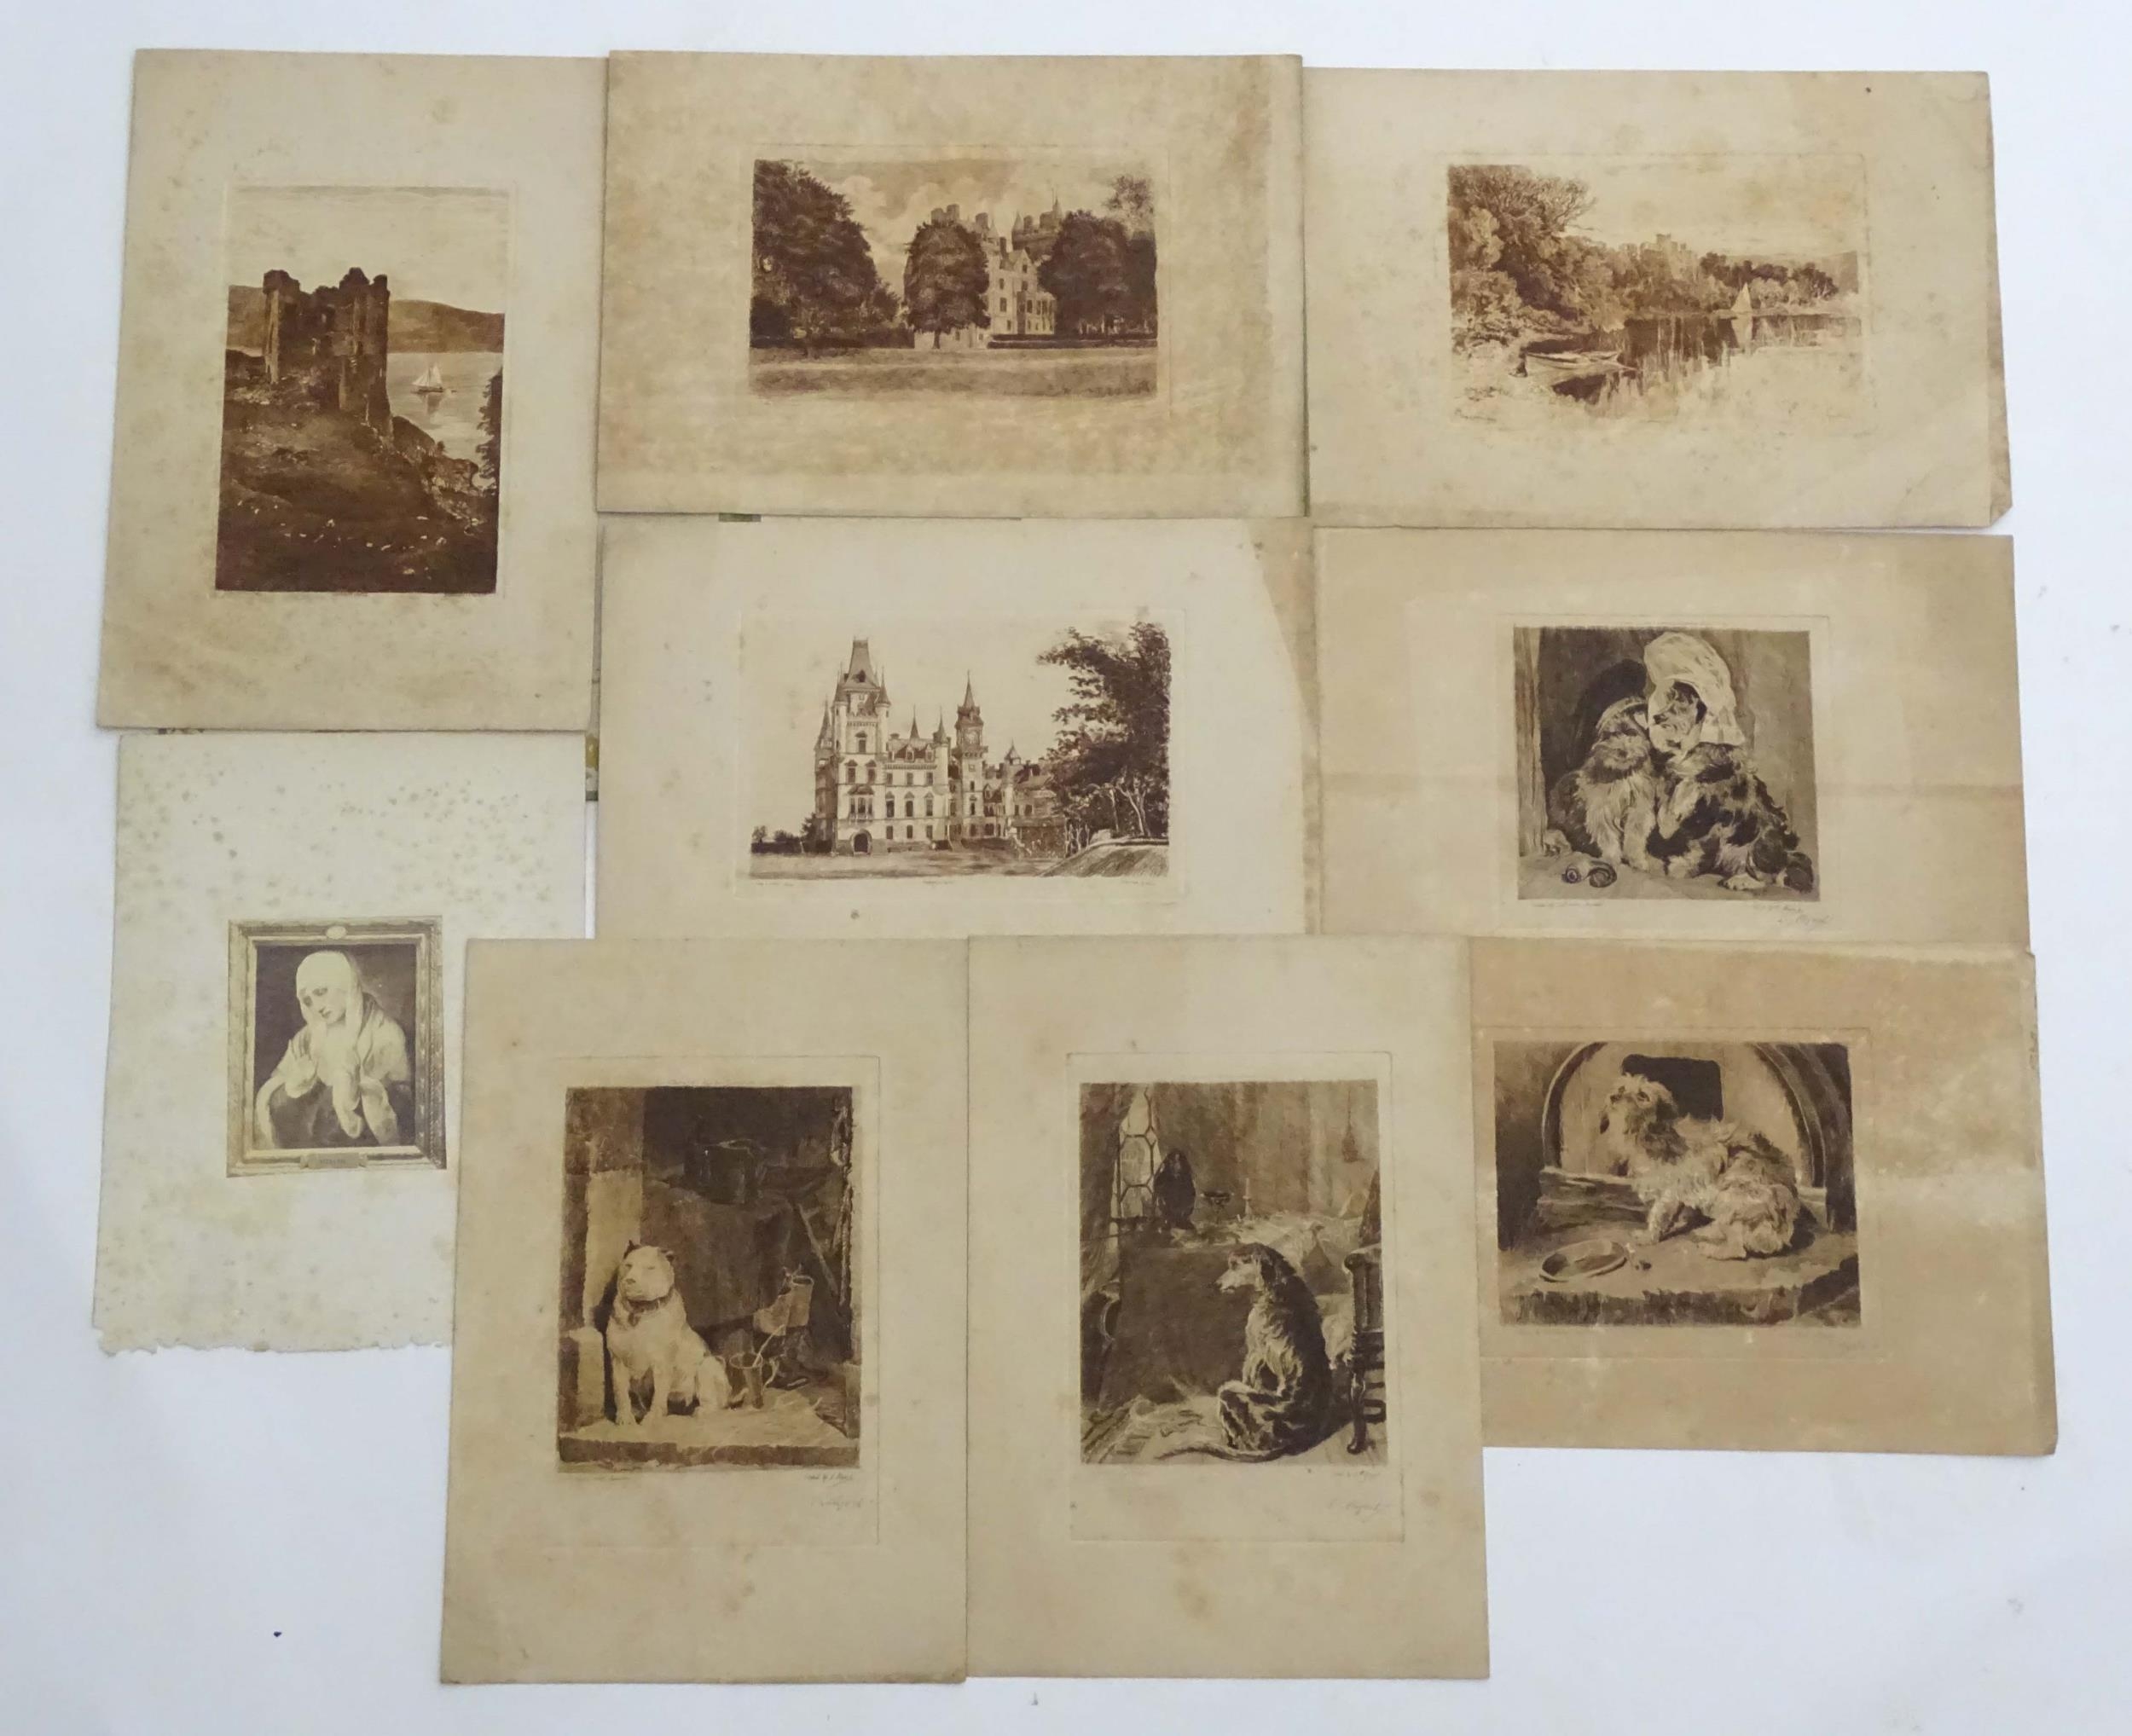 S. Myers after Sir Edwin Henry Landseer (1807-1873), 19th century, Four etchings depicting dogs to - Image 2 of 20